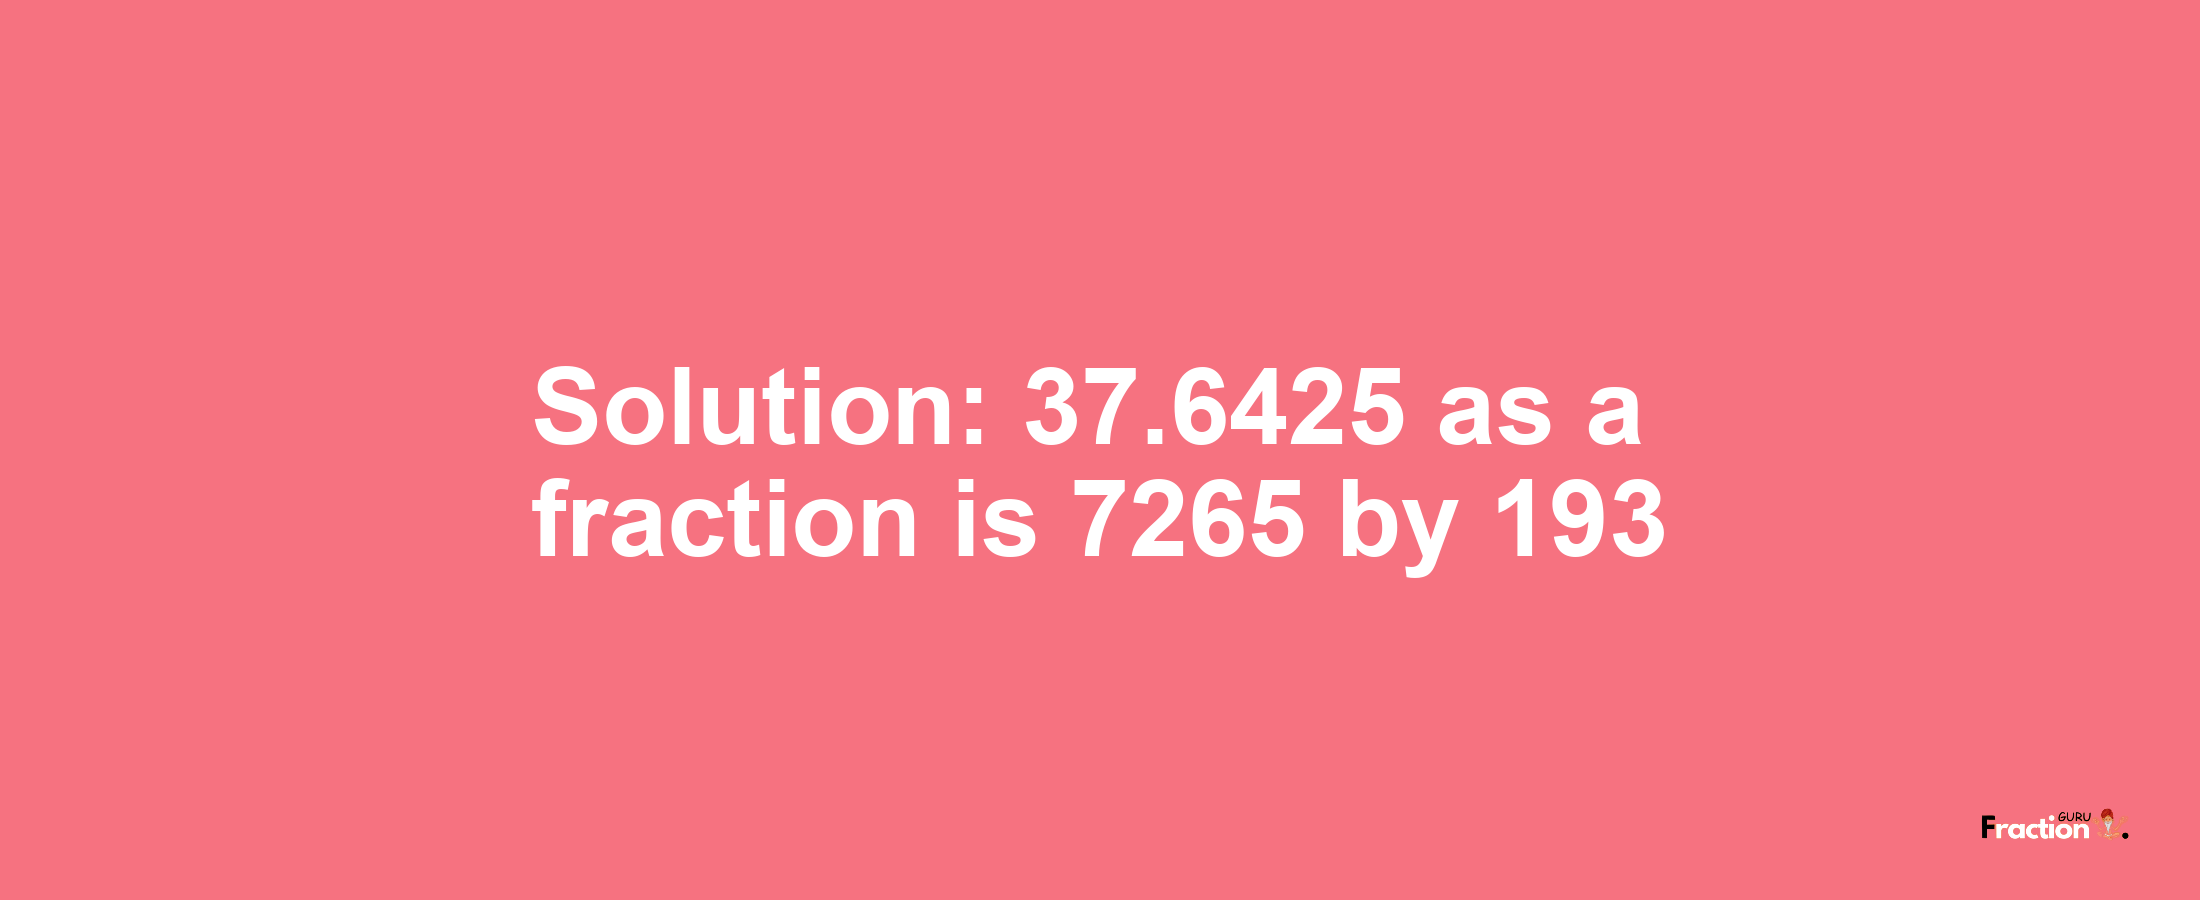 Solution:37.6425 as a fraction is 7265/193